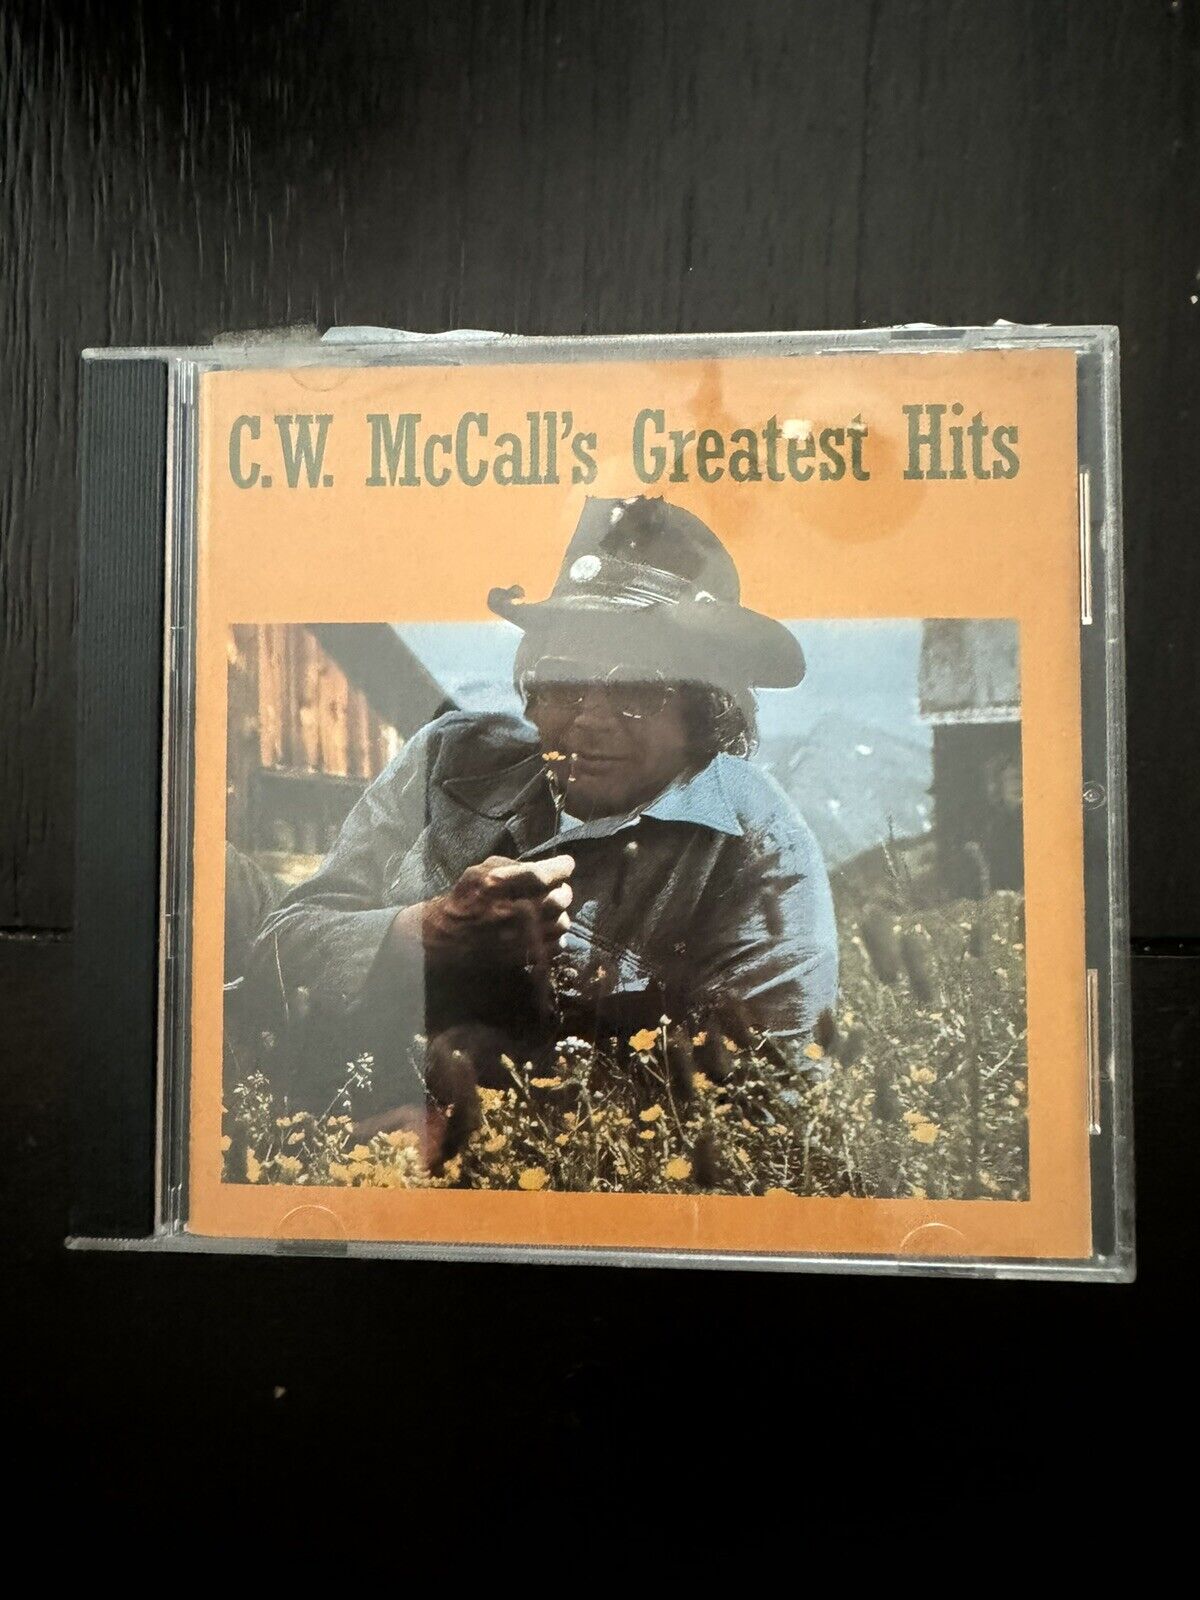 Greatest Hits by Mccall, C.W. (CD, 1993)